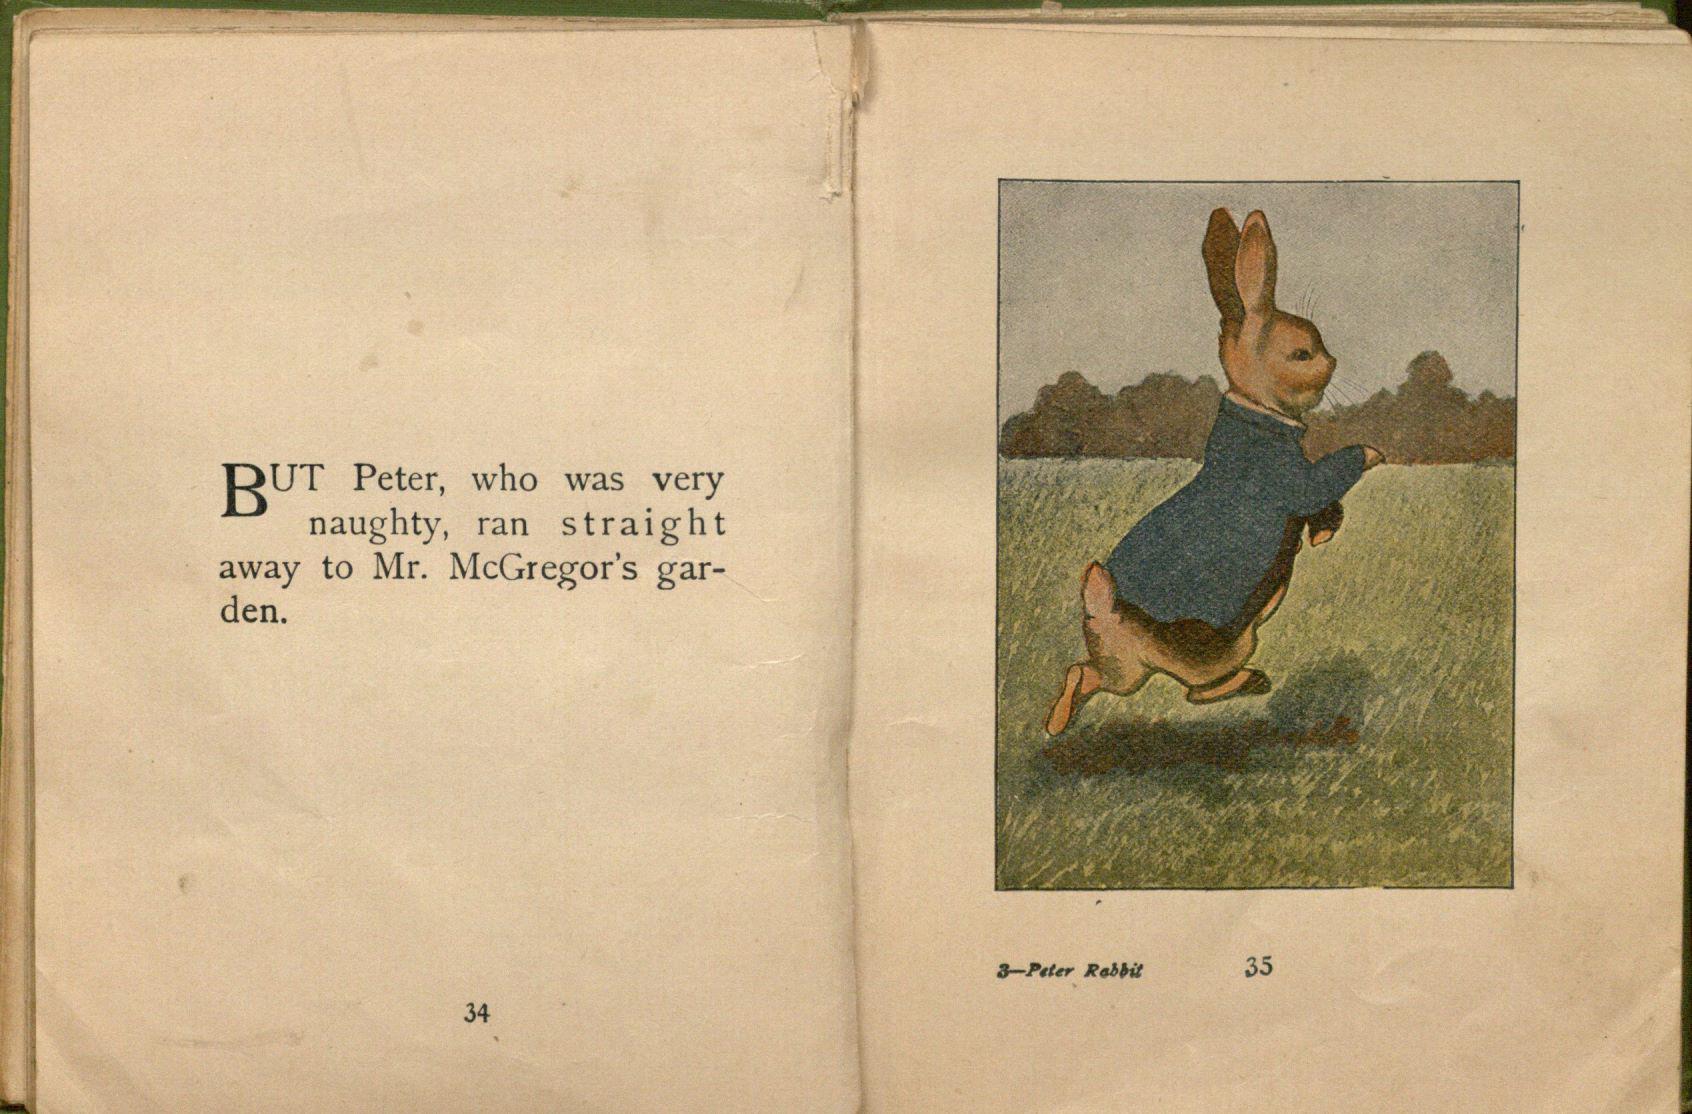 Pages 34-35 ofFront cover of Beatrix Potter’s "The Tale of Peter Rabbit" published in Philadelphia by H. Altemus in 1904.